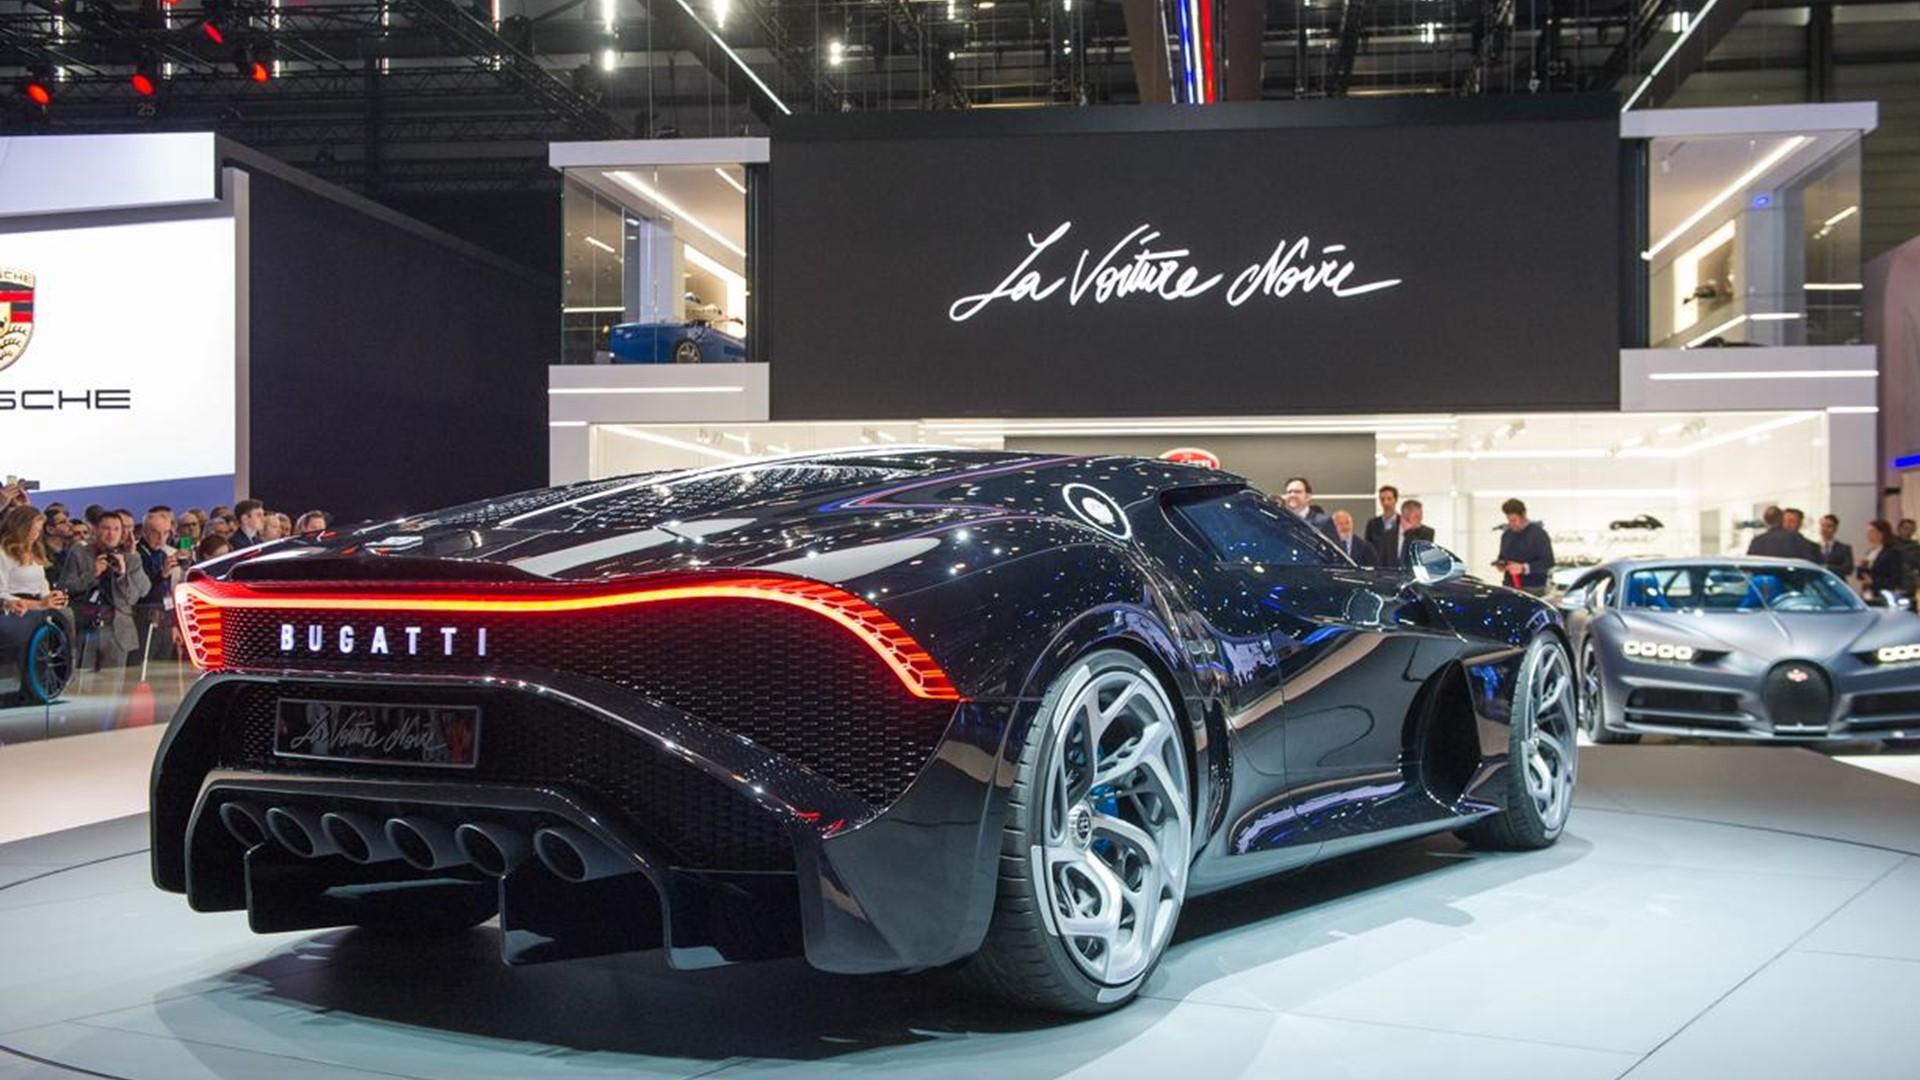 One and Only Bugatti Voiture Noire debuts in Geneva